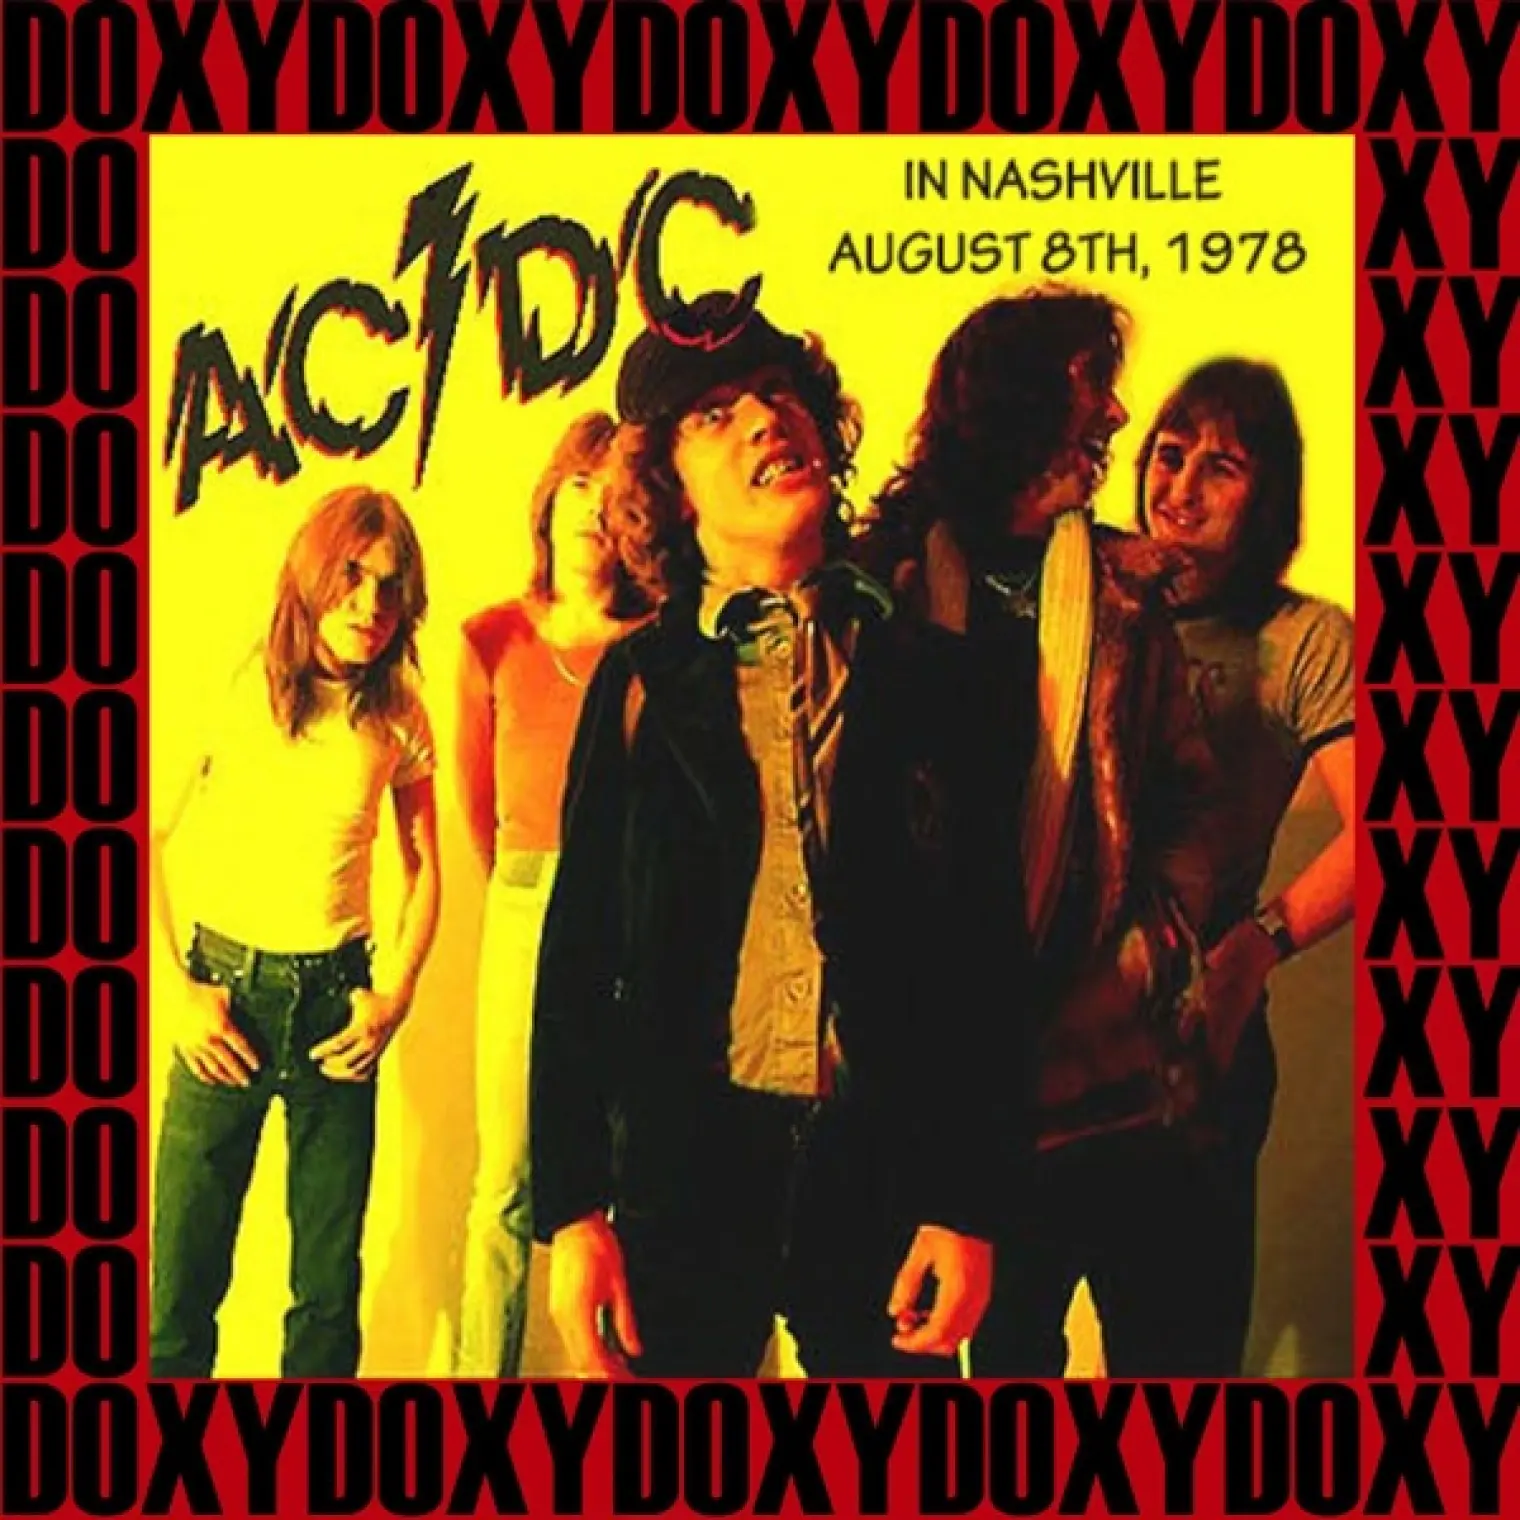 In Nashville, August 8th, 1978 (Doxy Collection, Remastered, Live On Wkdf Fm Broadcasting) -  AC/DC 